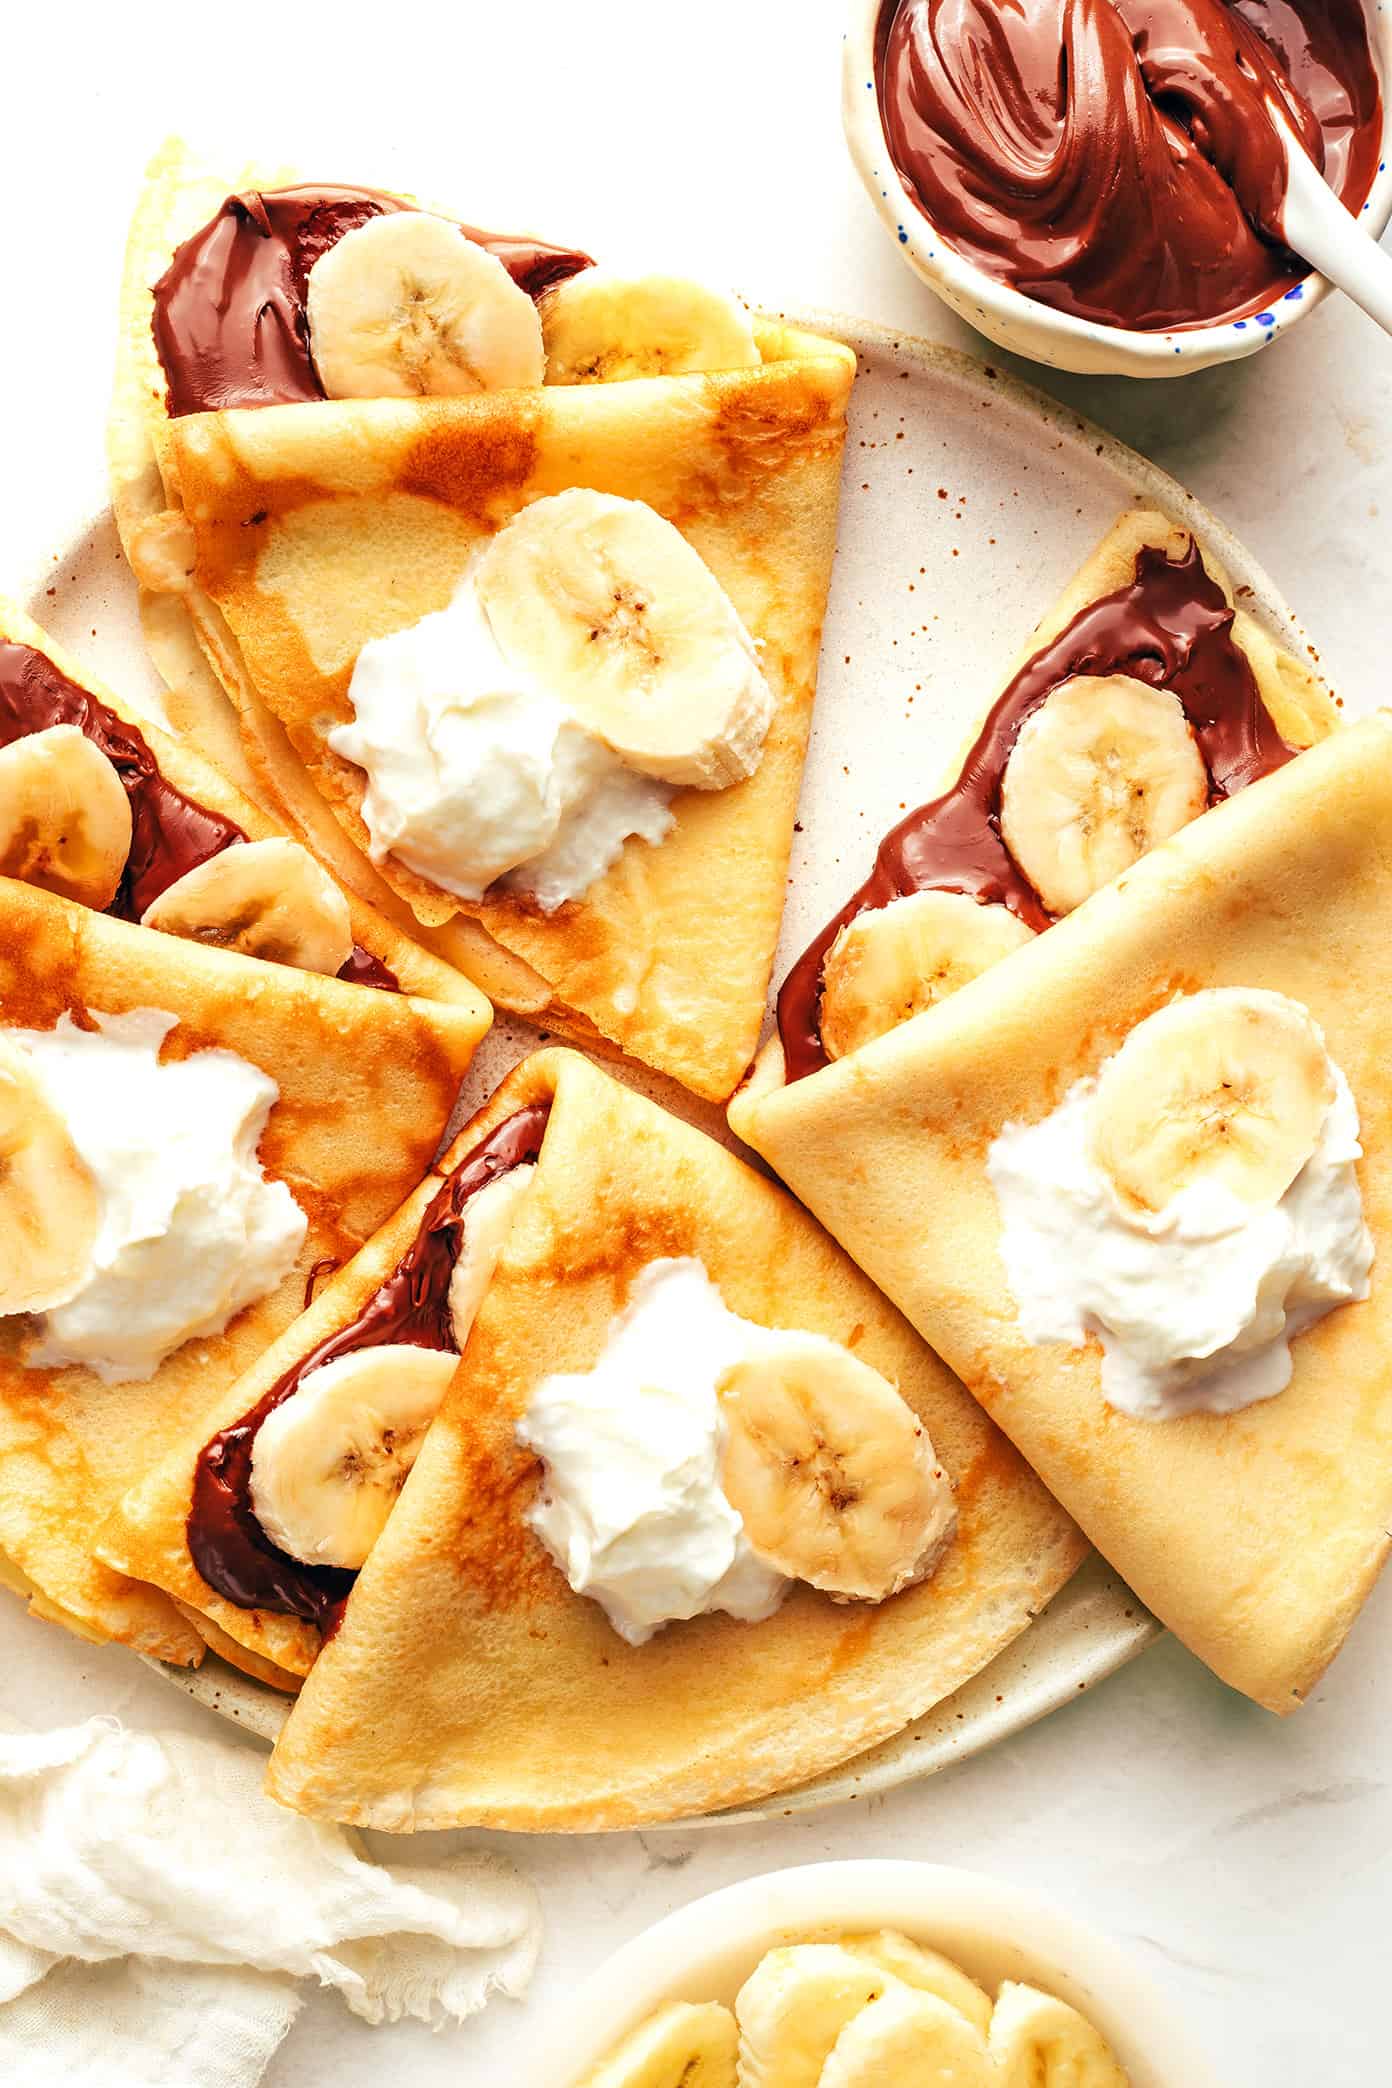 Crepes with bananas and Nutella